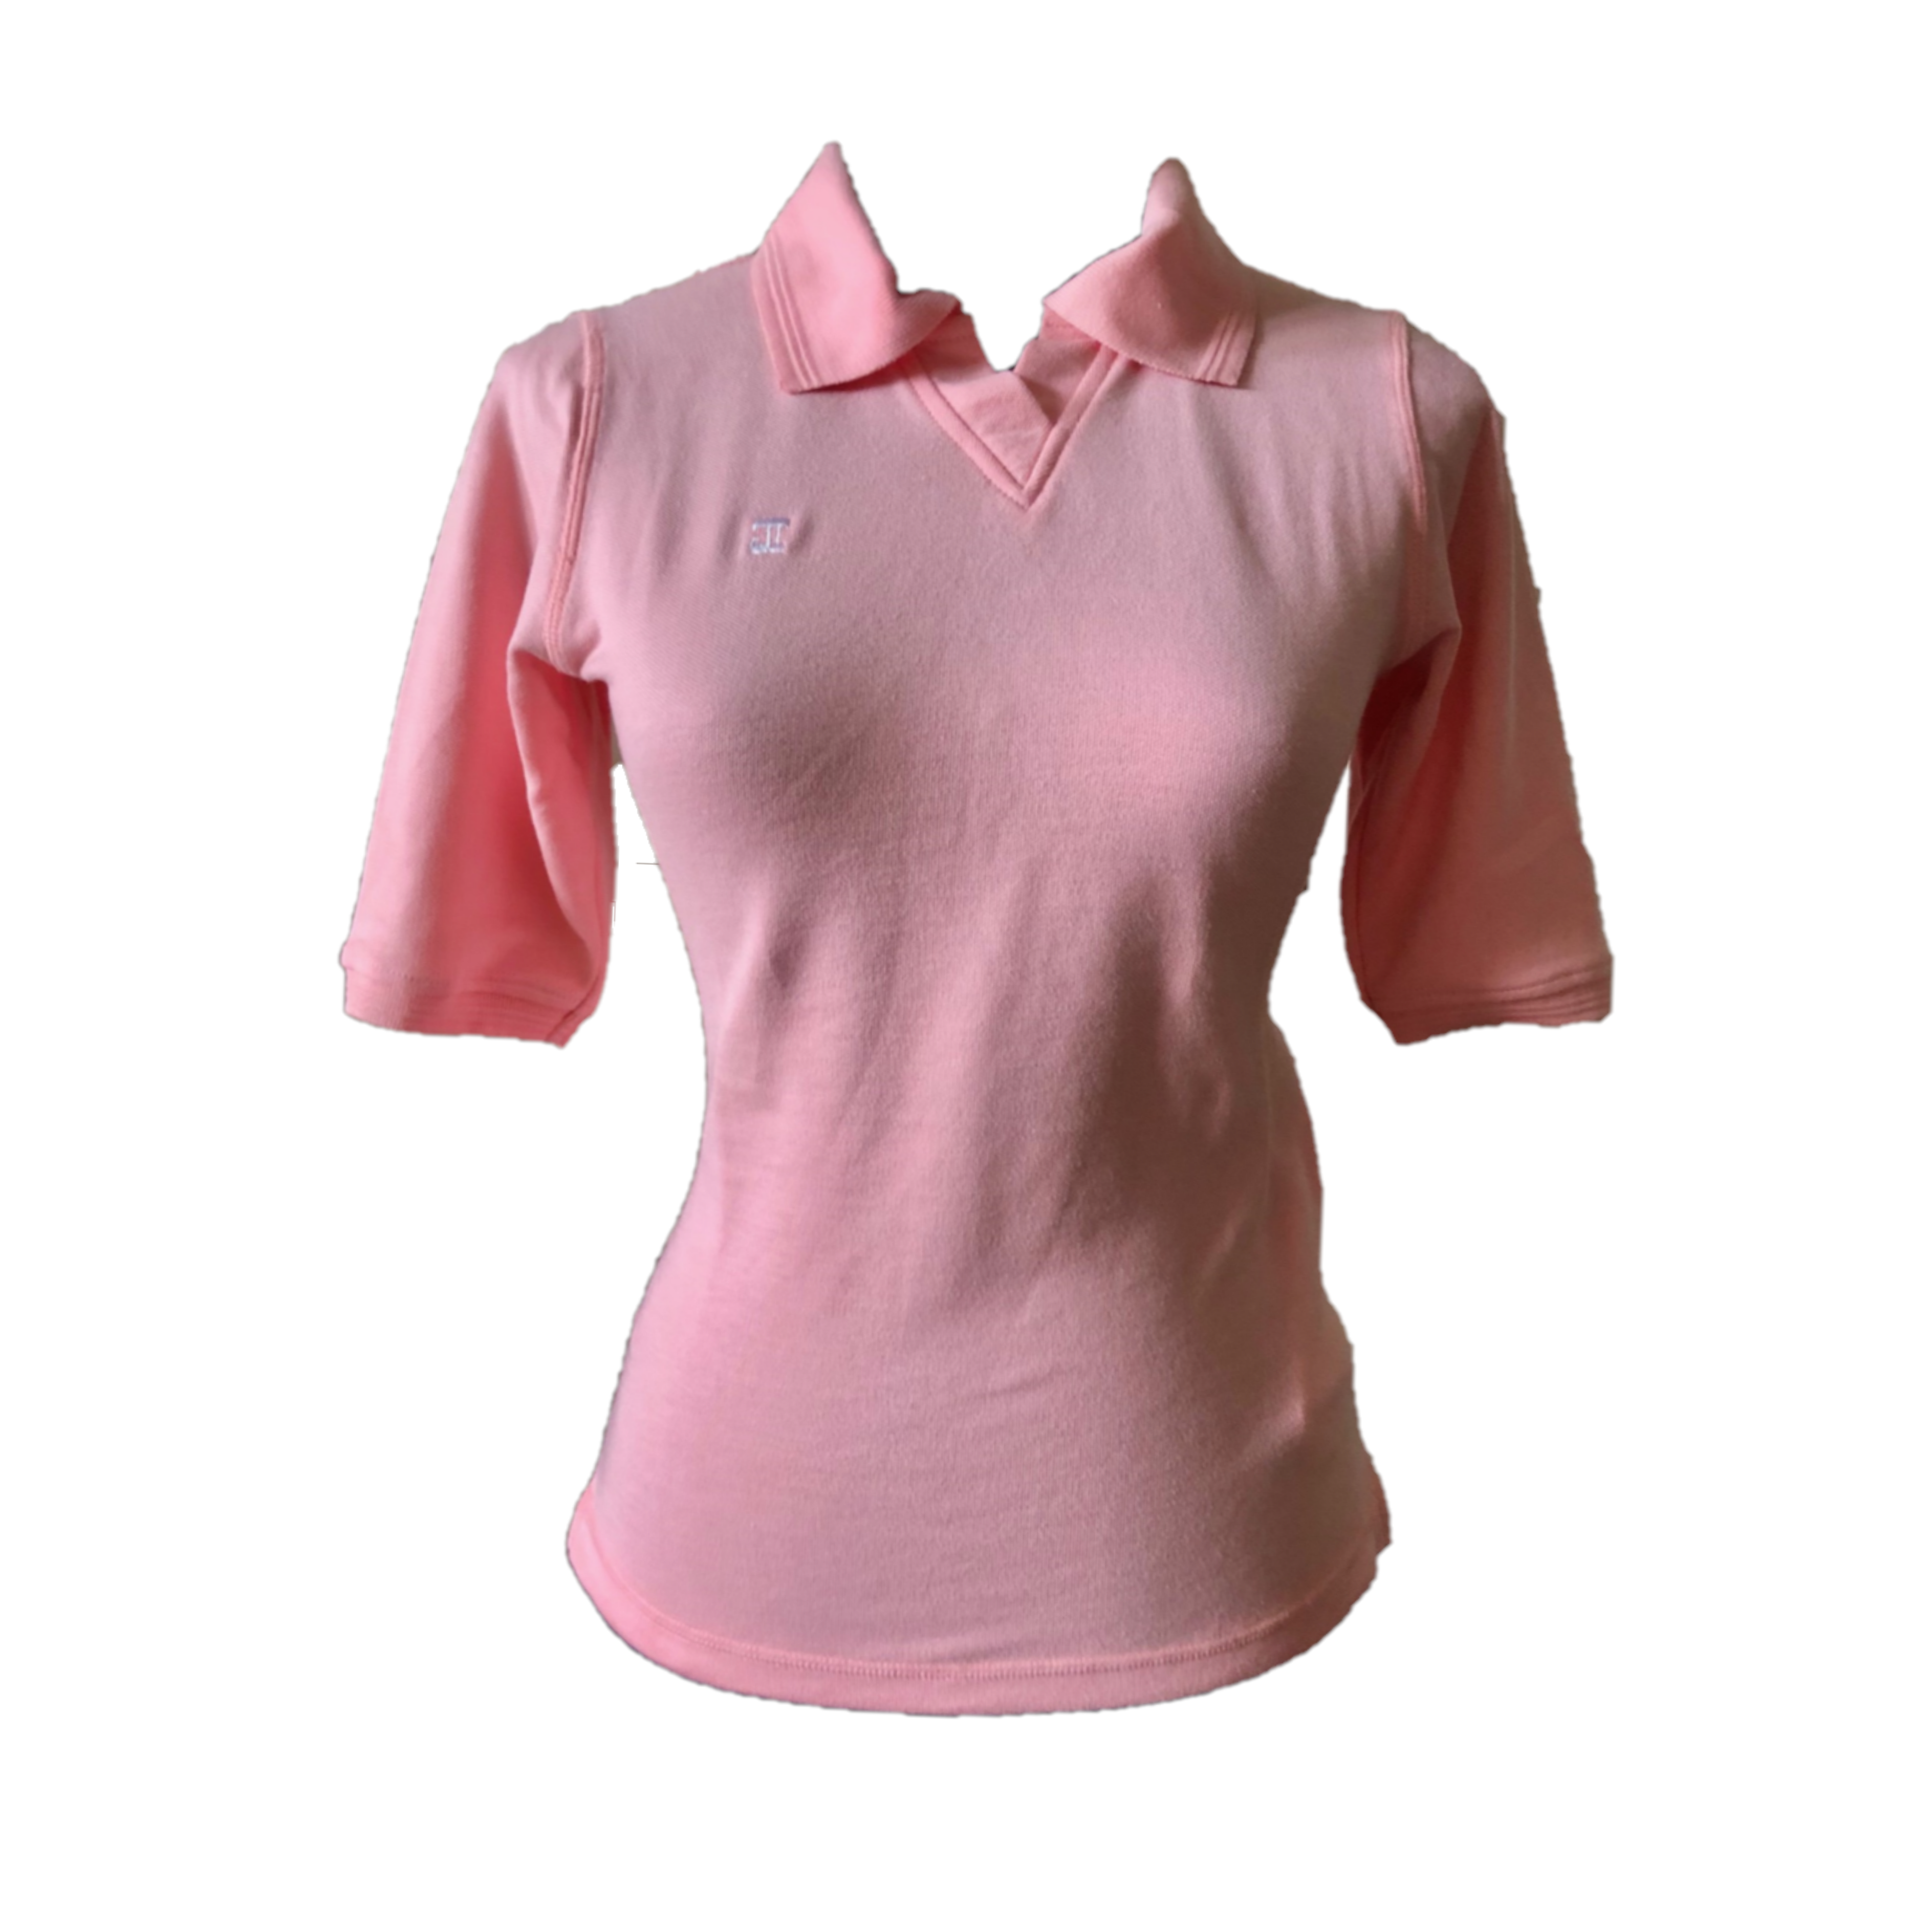 LT – 106A || Ladies Top Baby Pink Texture Cloth Elbow Length Sleeve V neck With Collar Rear V Overlock Stitched Saddle